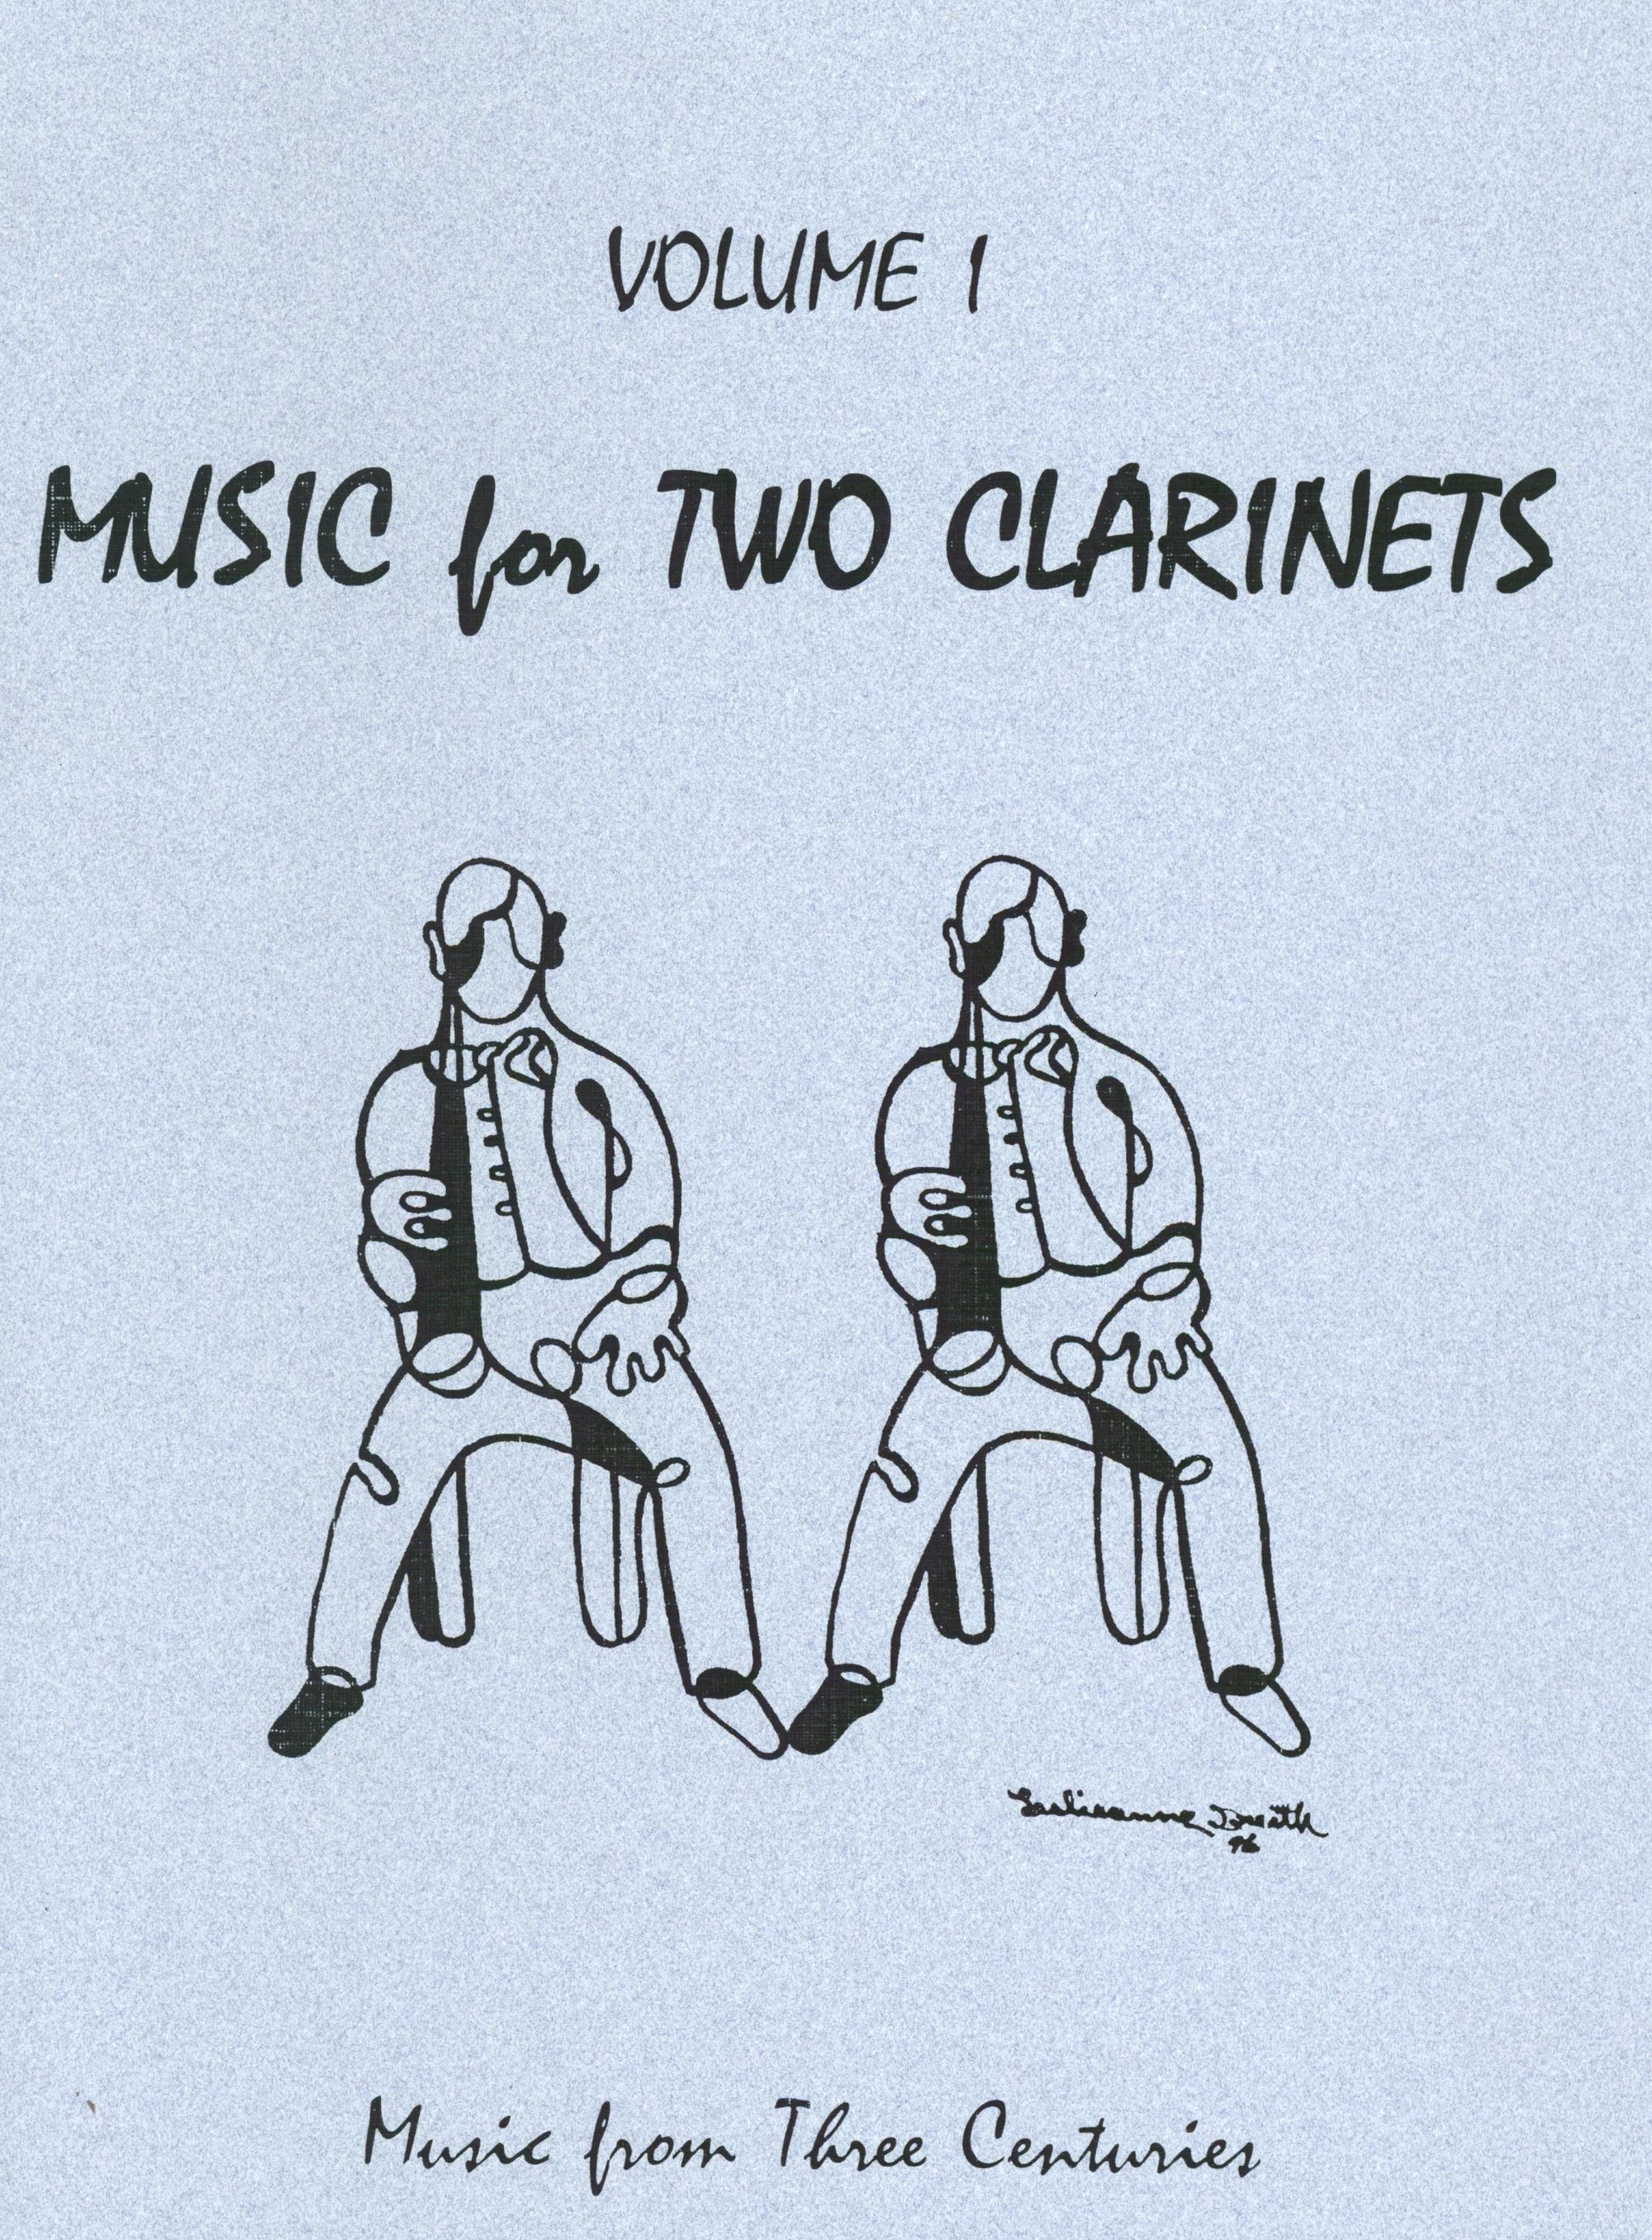 Music for Two Clarinets - Volume 1